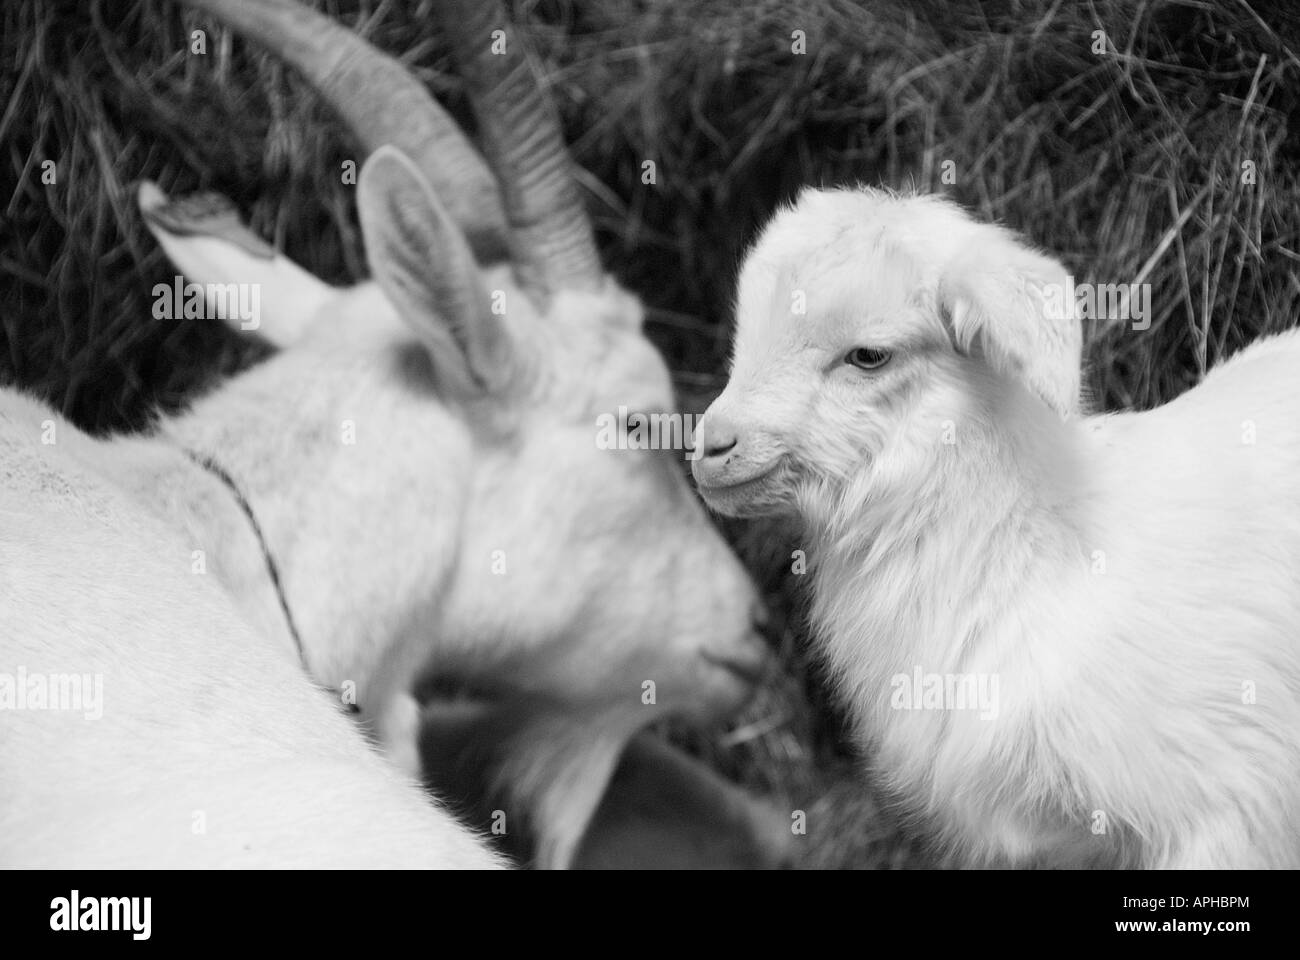 Stock Photo of a white goat lying down in the hay with her baby kid Stock Photo